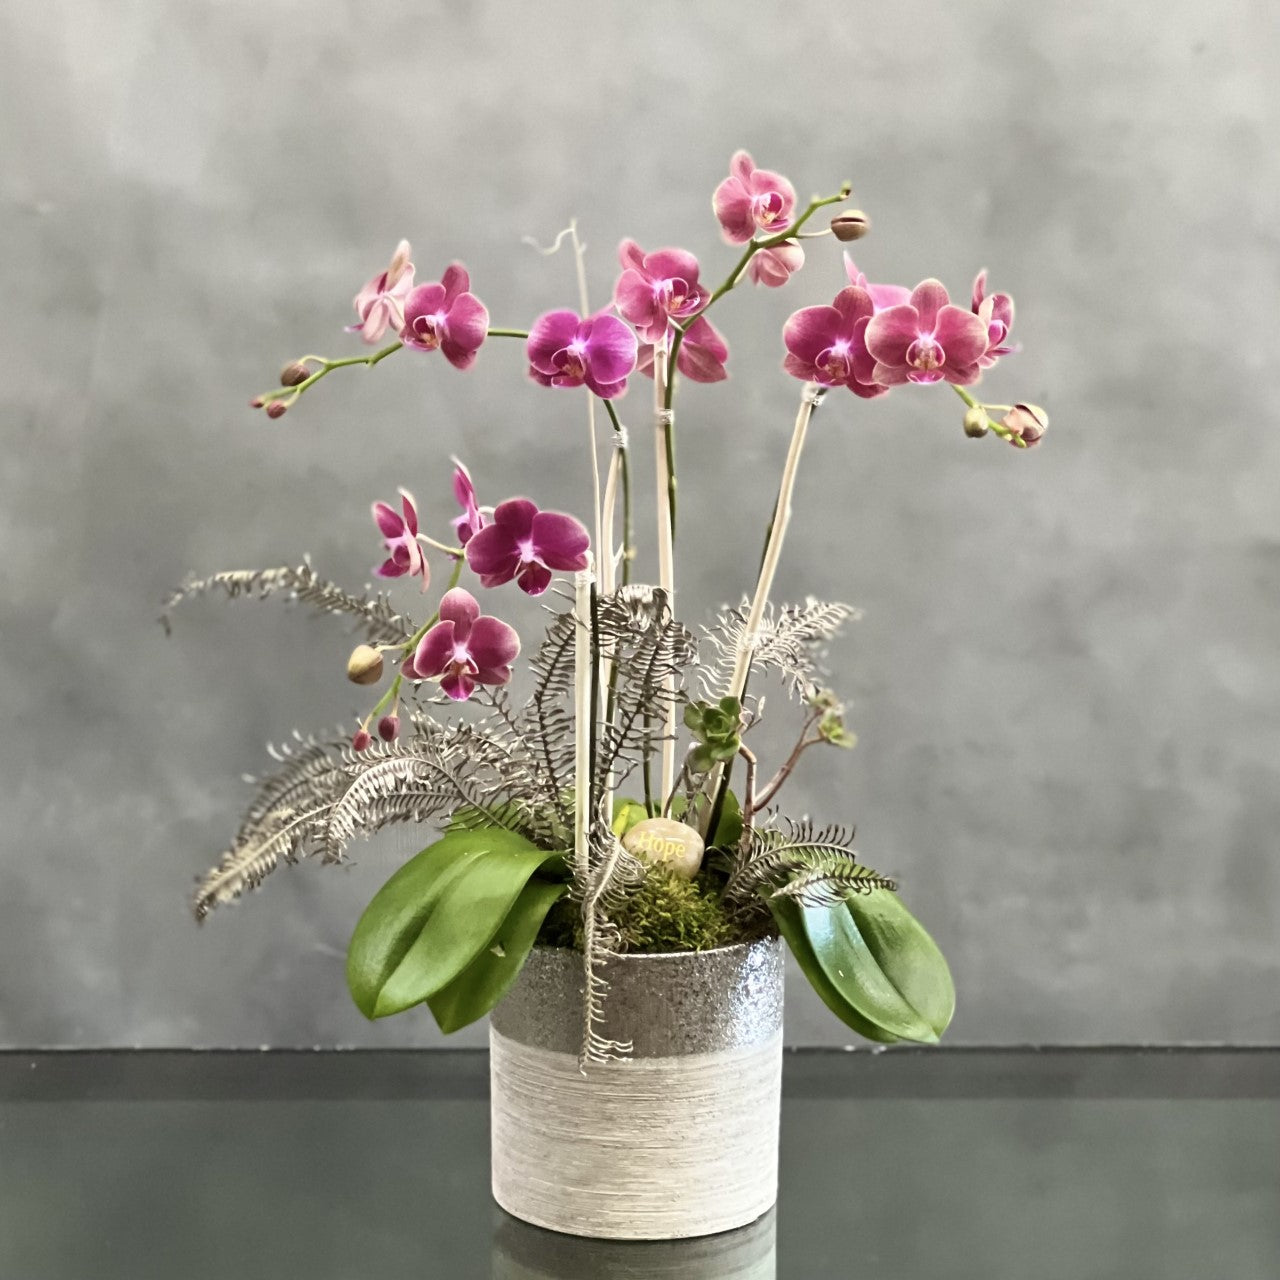 Burgundy Tango Orchids presented by Beverly Hills Florist can be arranged for same day delivery! 2 deep Burgundy double mini Orchid plants stand tall with some succulents in a beautiful white and silver ceramic vase - a very special gift of enduring beauty. "Hope" Rock Included.